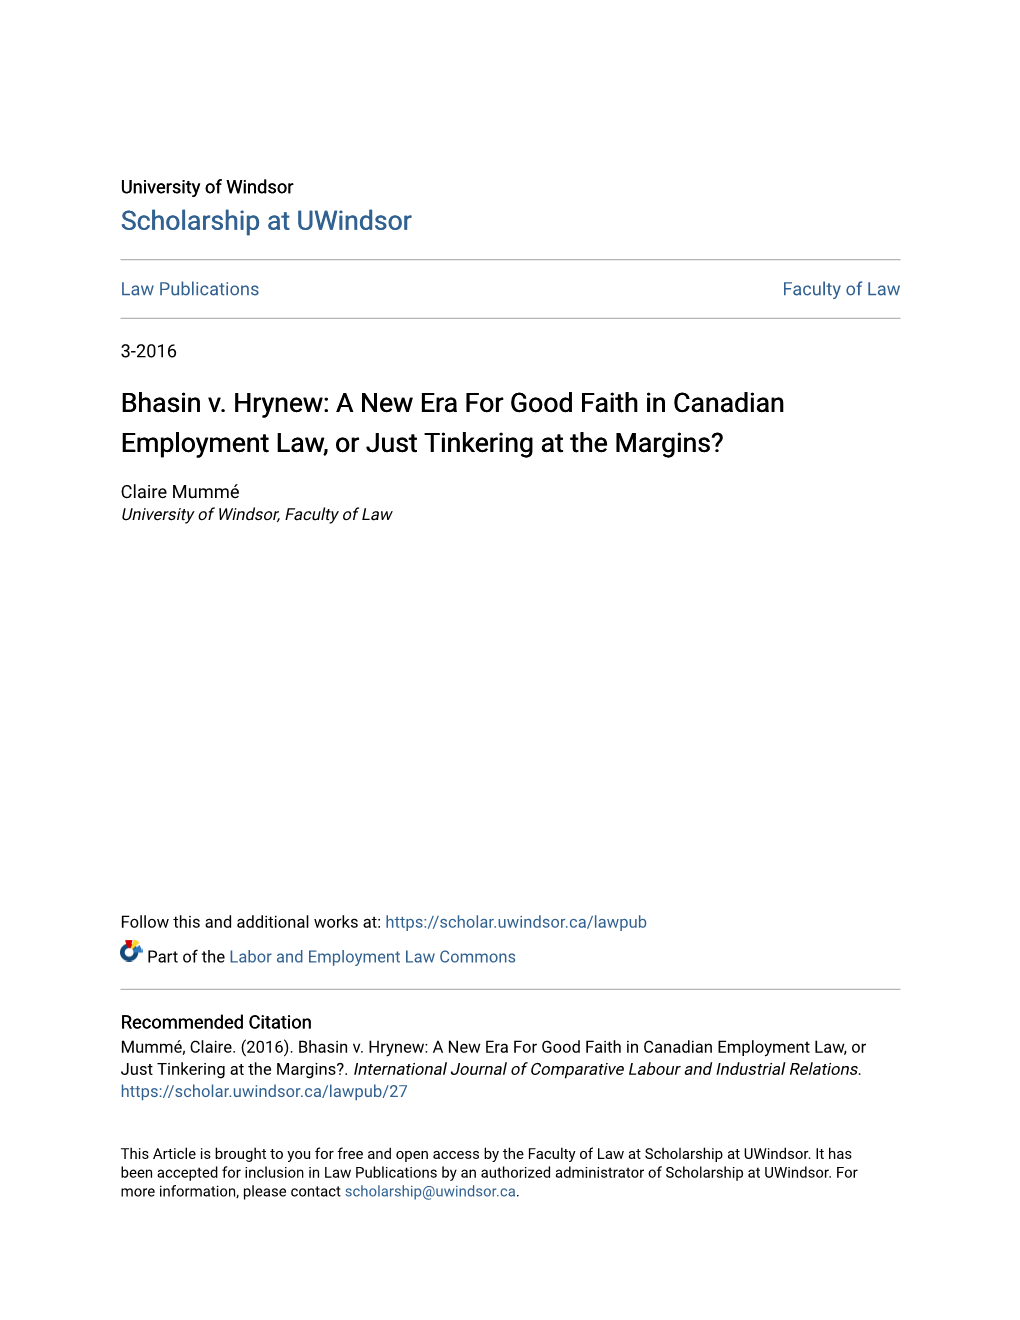 Bhasin V. Hrynew: a New Era for Good Faith in Canadian Employment Law, Or Just Tinkering at the Margins?